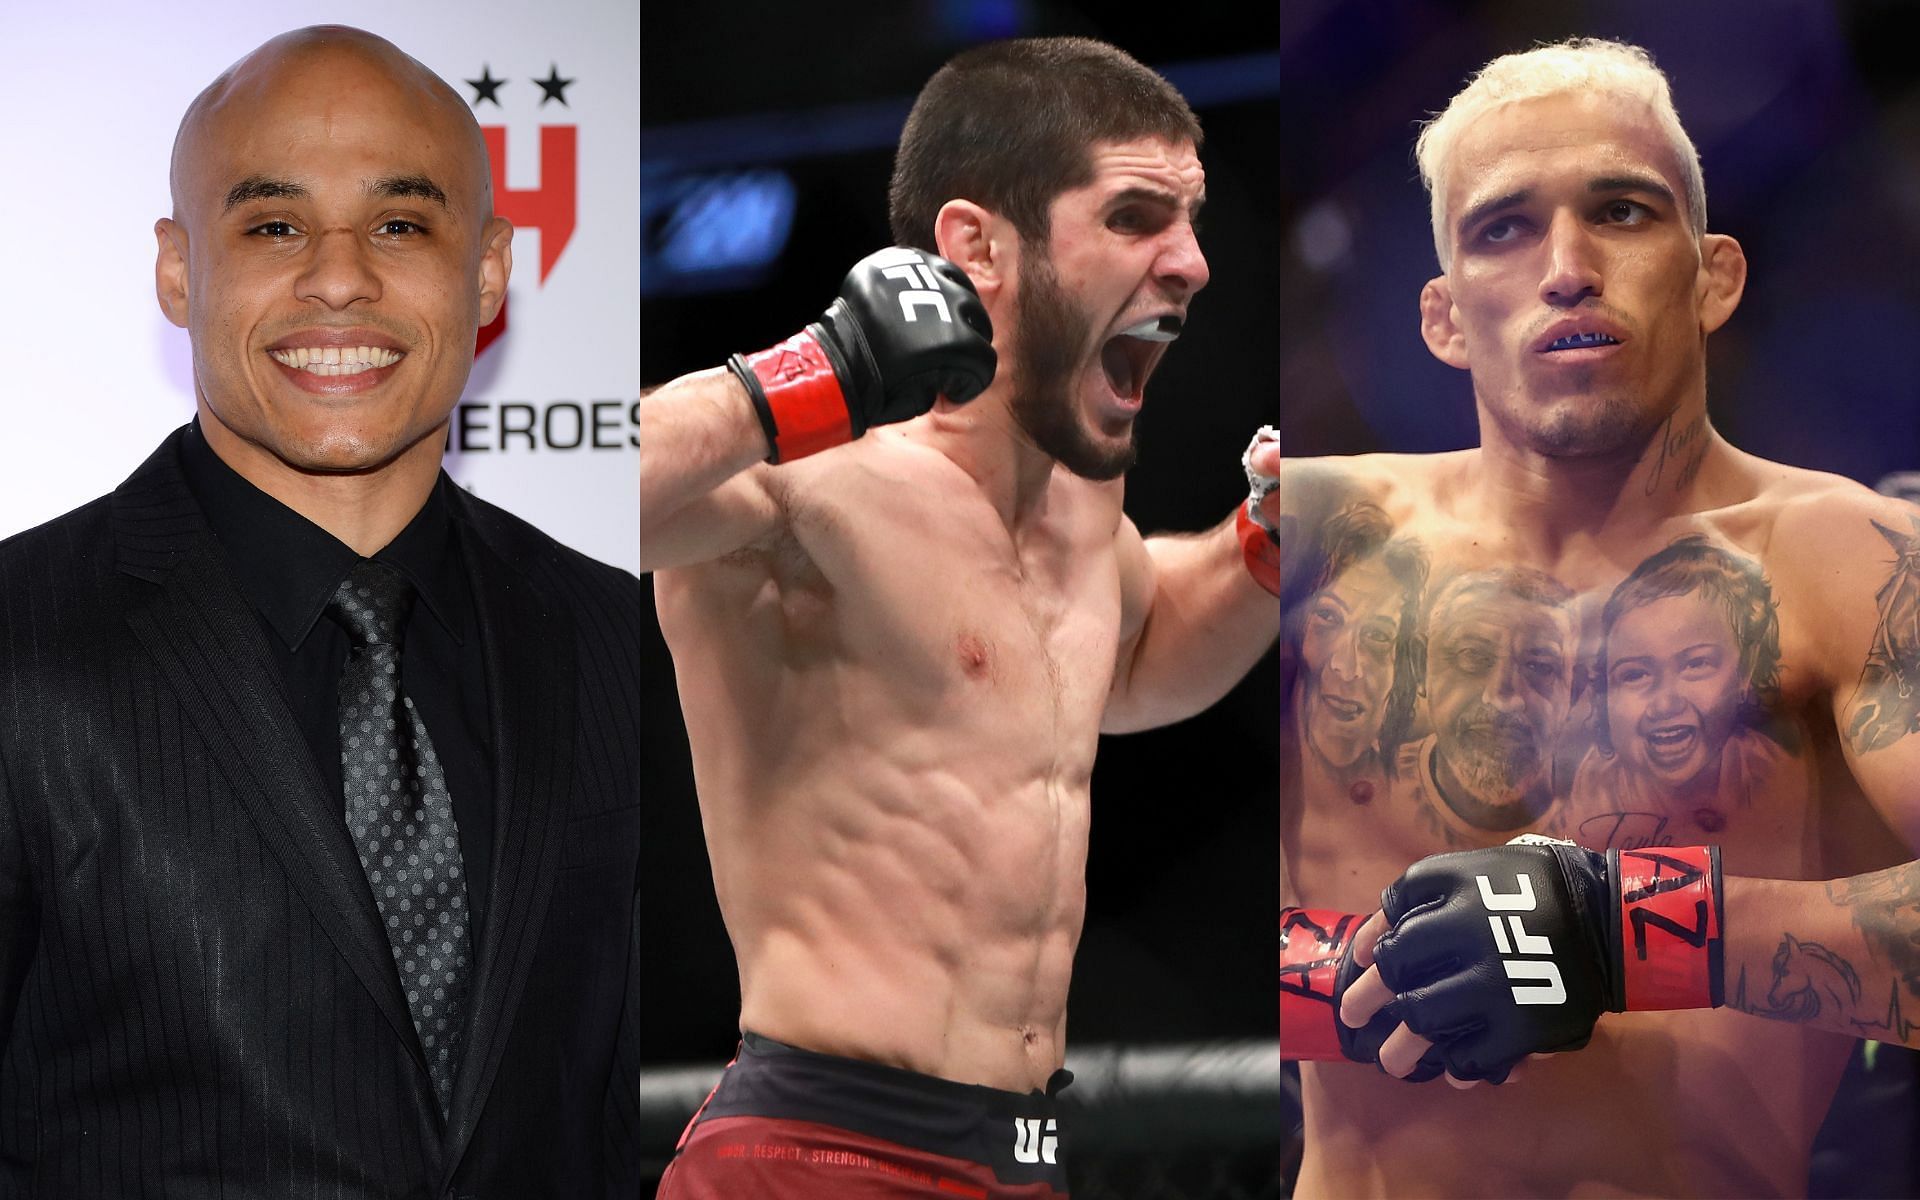 Abdelaziz, Makhachev, and Oliveira (left, center, and right)